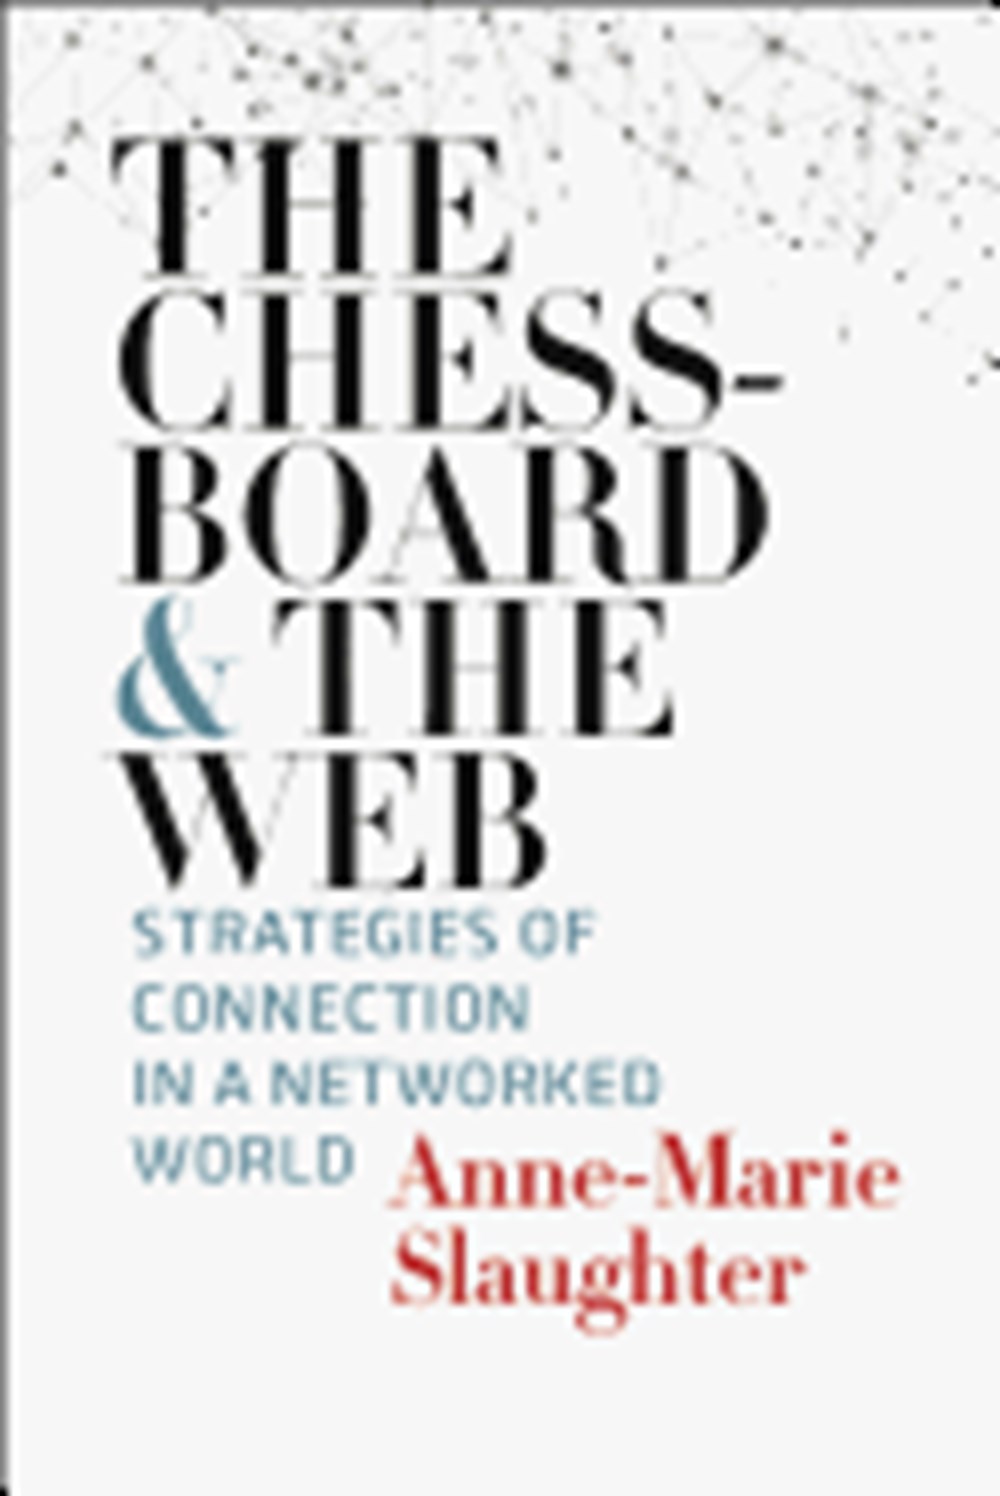 Chessboard and the Web: Strategies of Connection in a Networked World